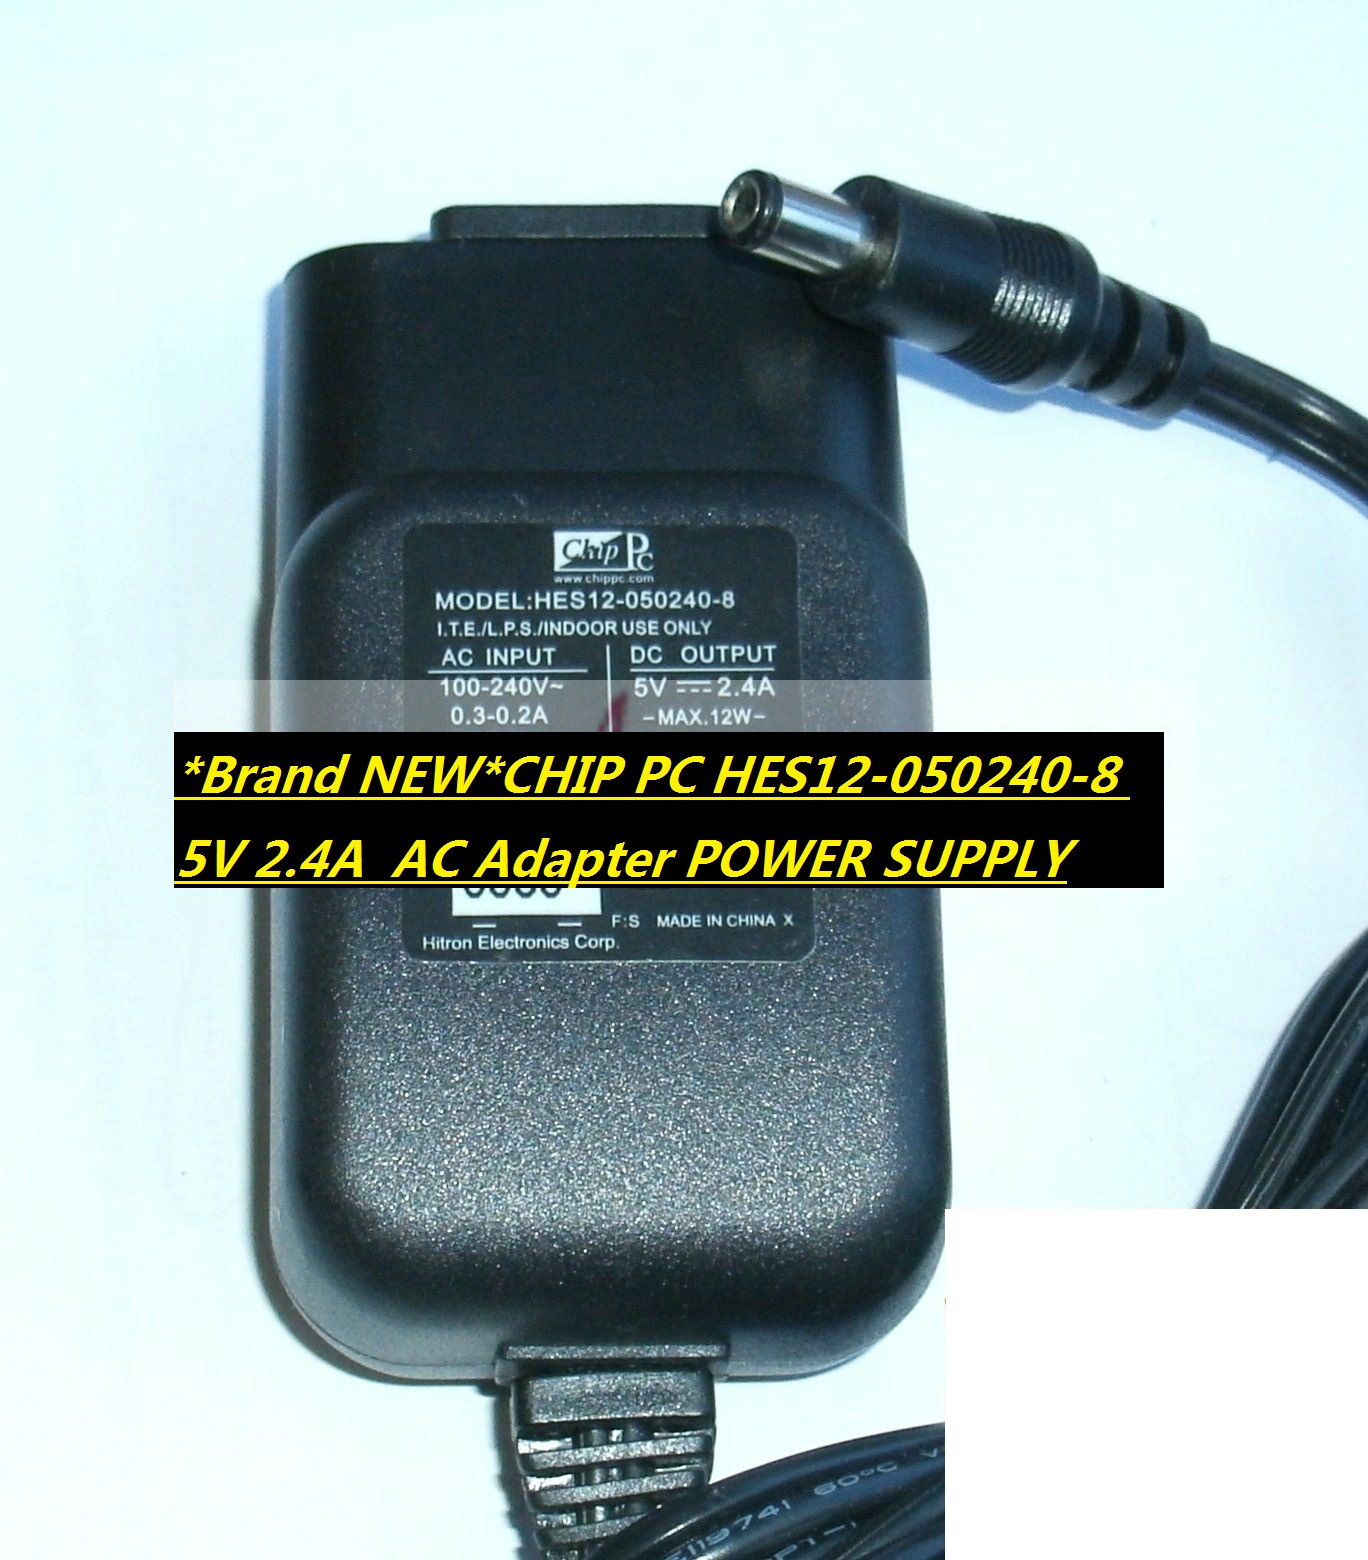 *Brand NEW*CHIP PC HES12-050240-8 5V 2.4A AC Adapter POWER SUPPLY